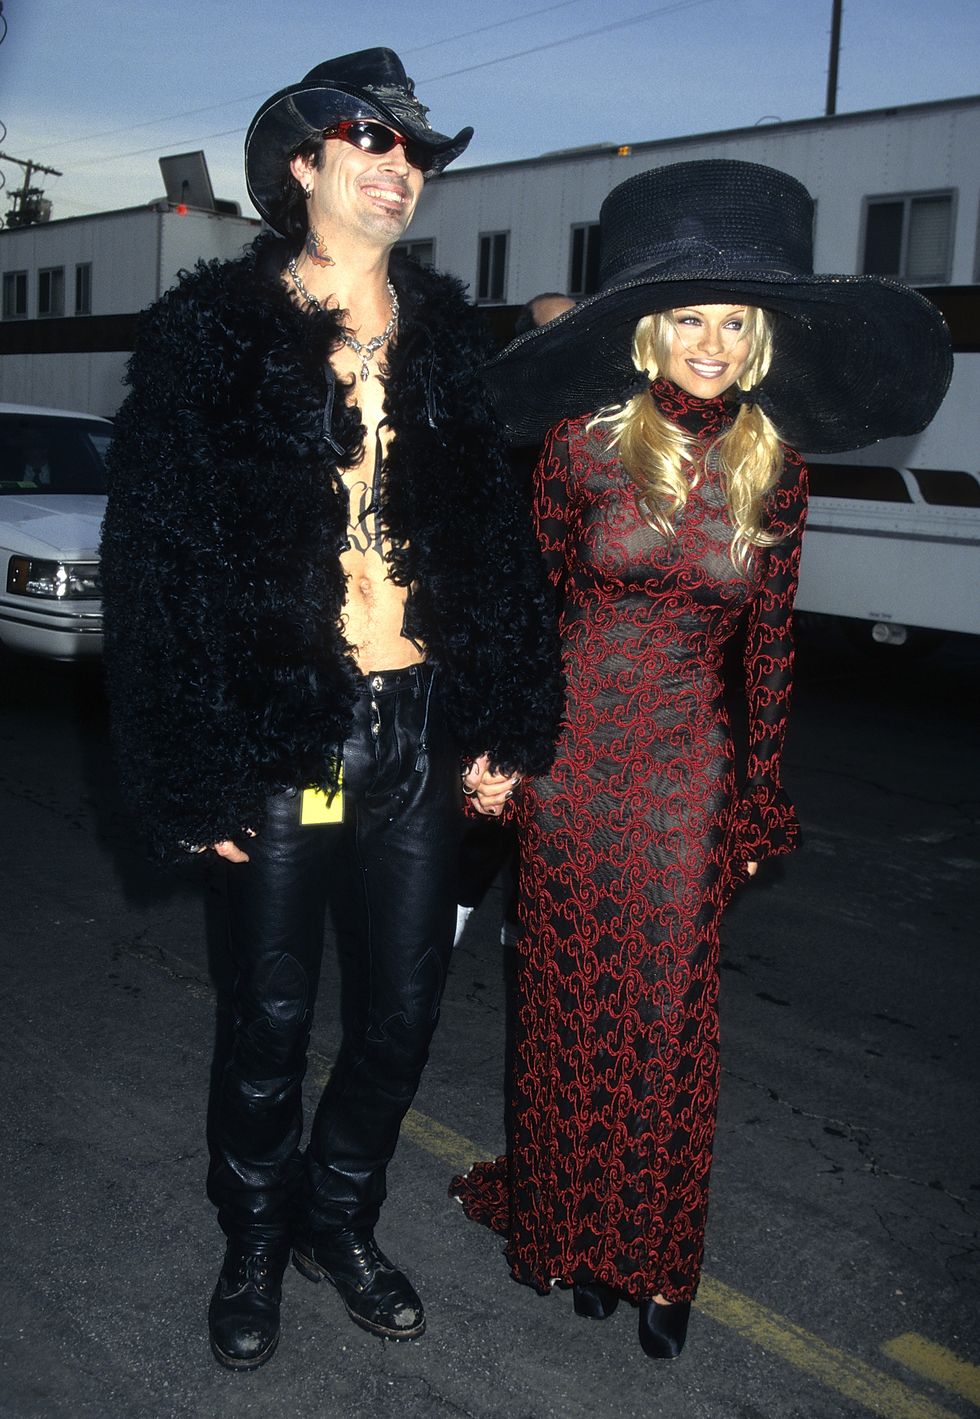 los angeles january 27 musician tommy lee of motley crue and actress pamela anderson attend the 24th annual american music awards on january 27, 1997 at the shrine auditorium in los angeles, california photo by ron galella, ltdron galella collection via getty images